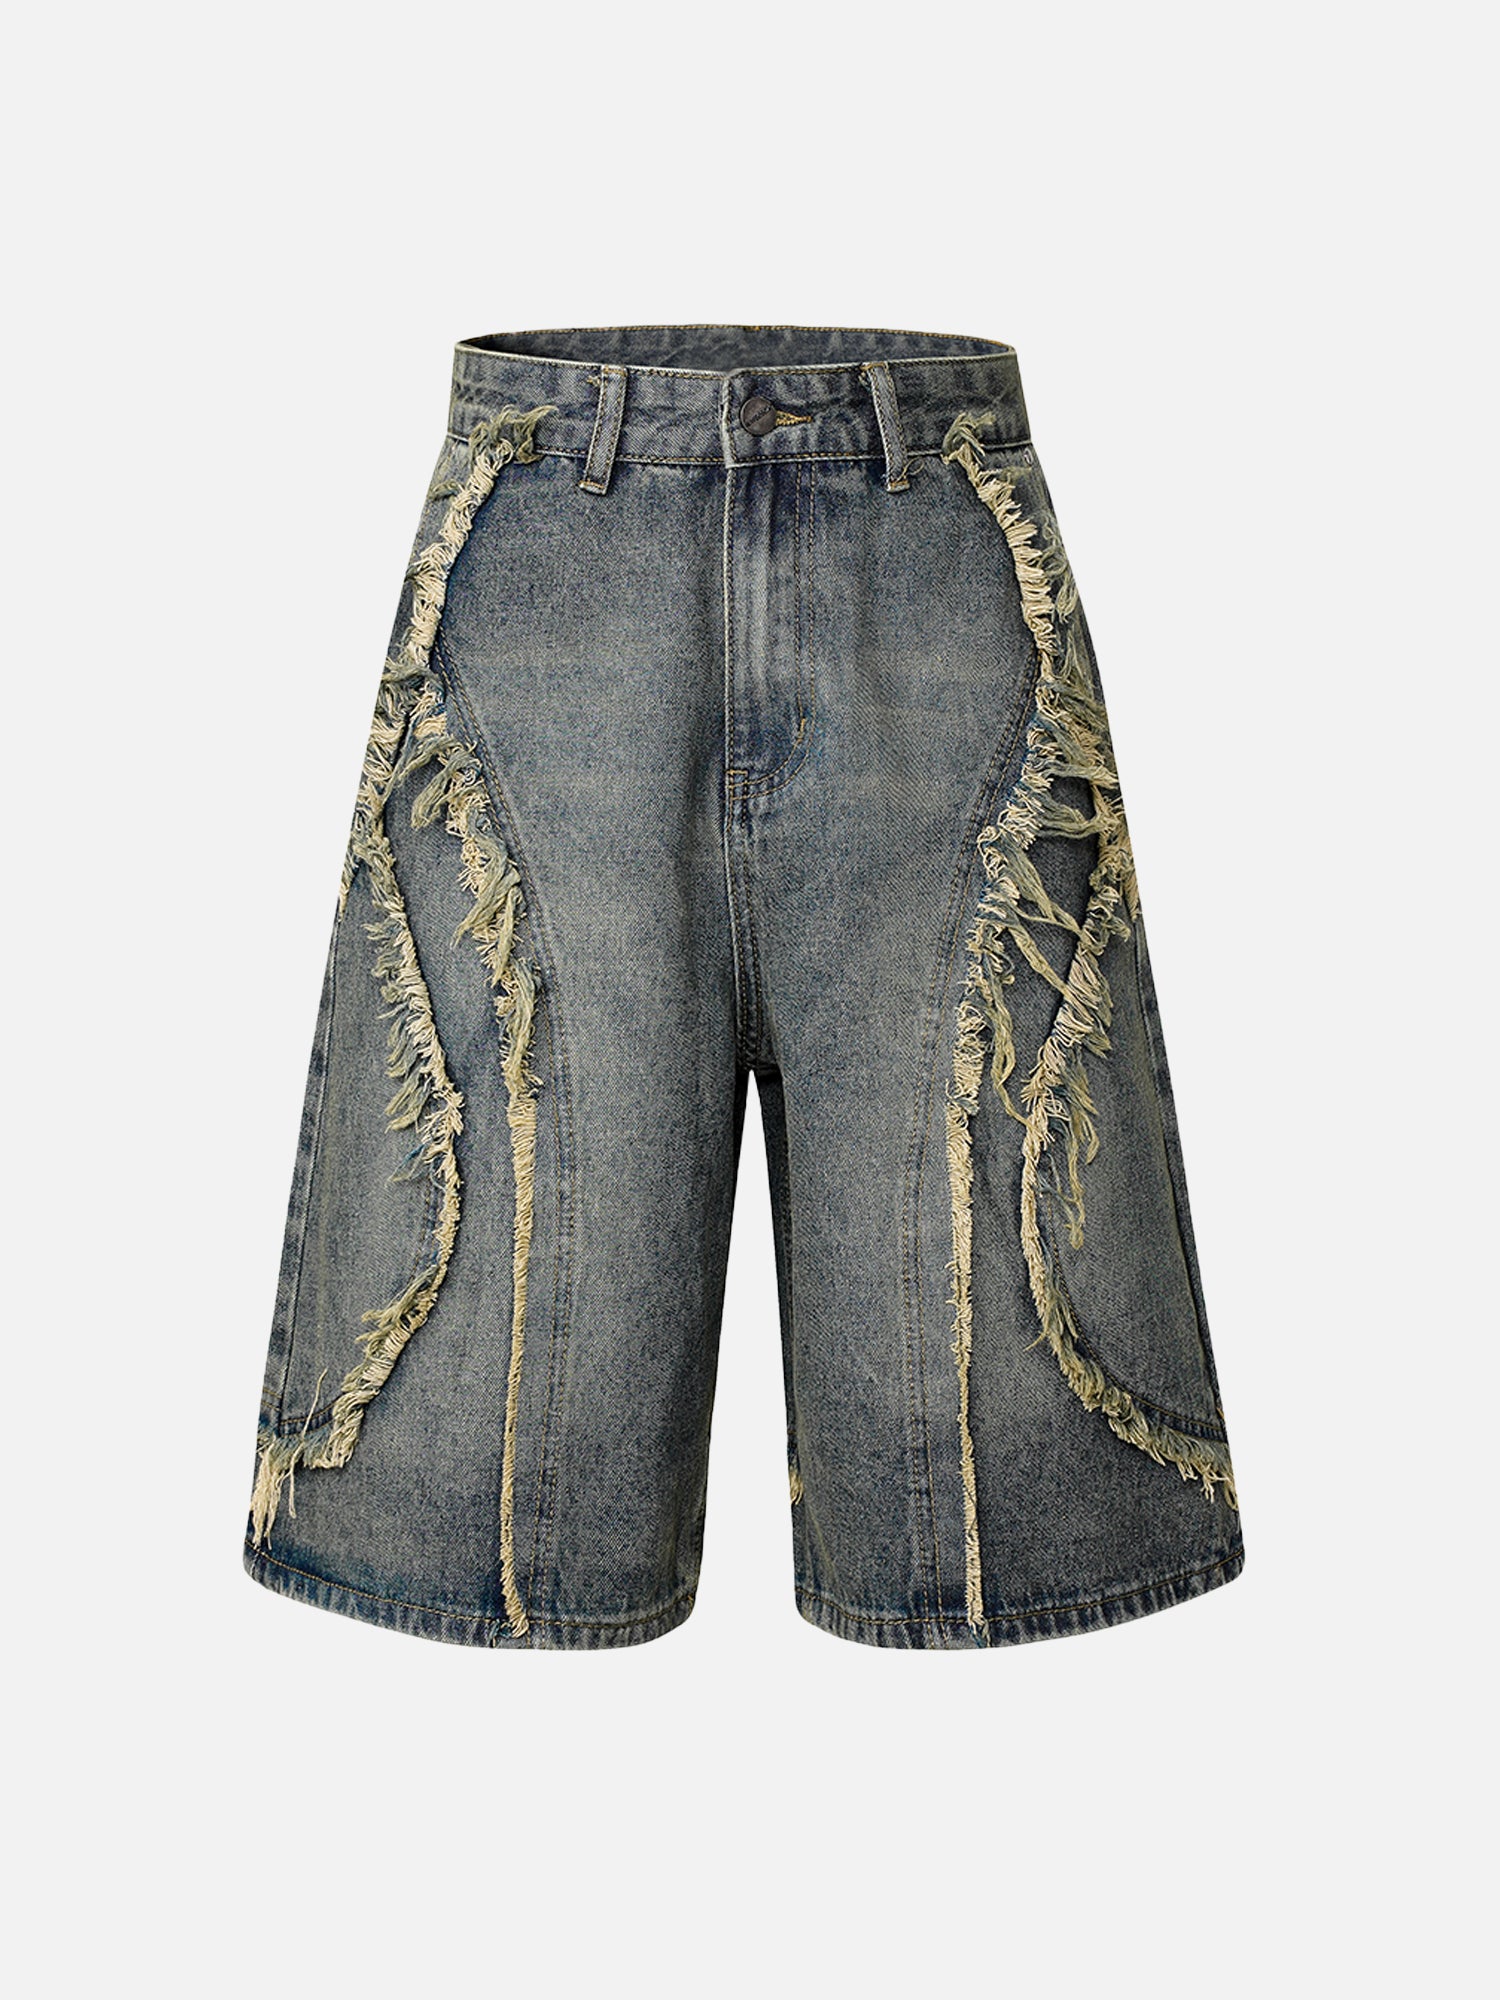 Thesupermade High Street Washed Distressed Denim Shorts